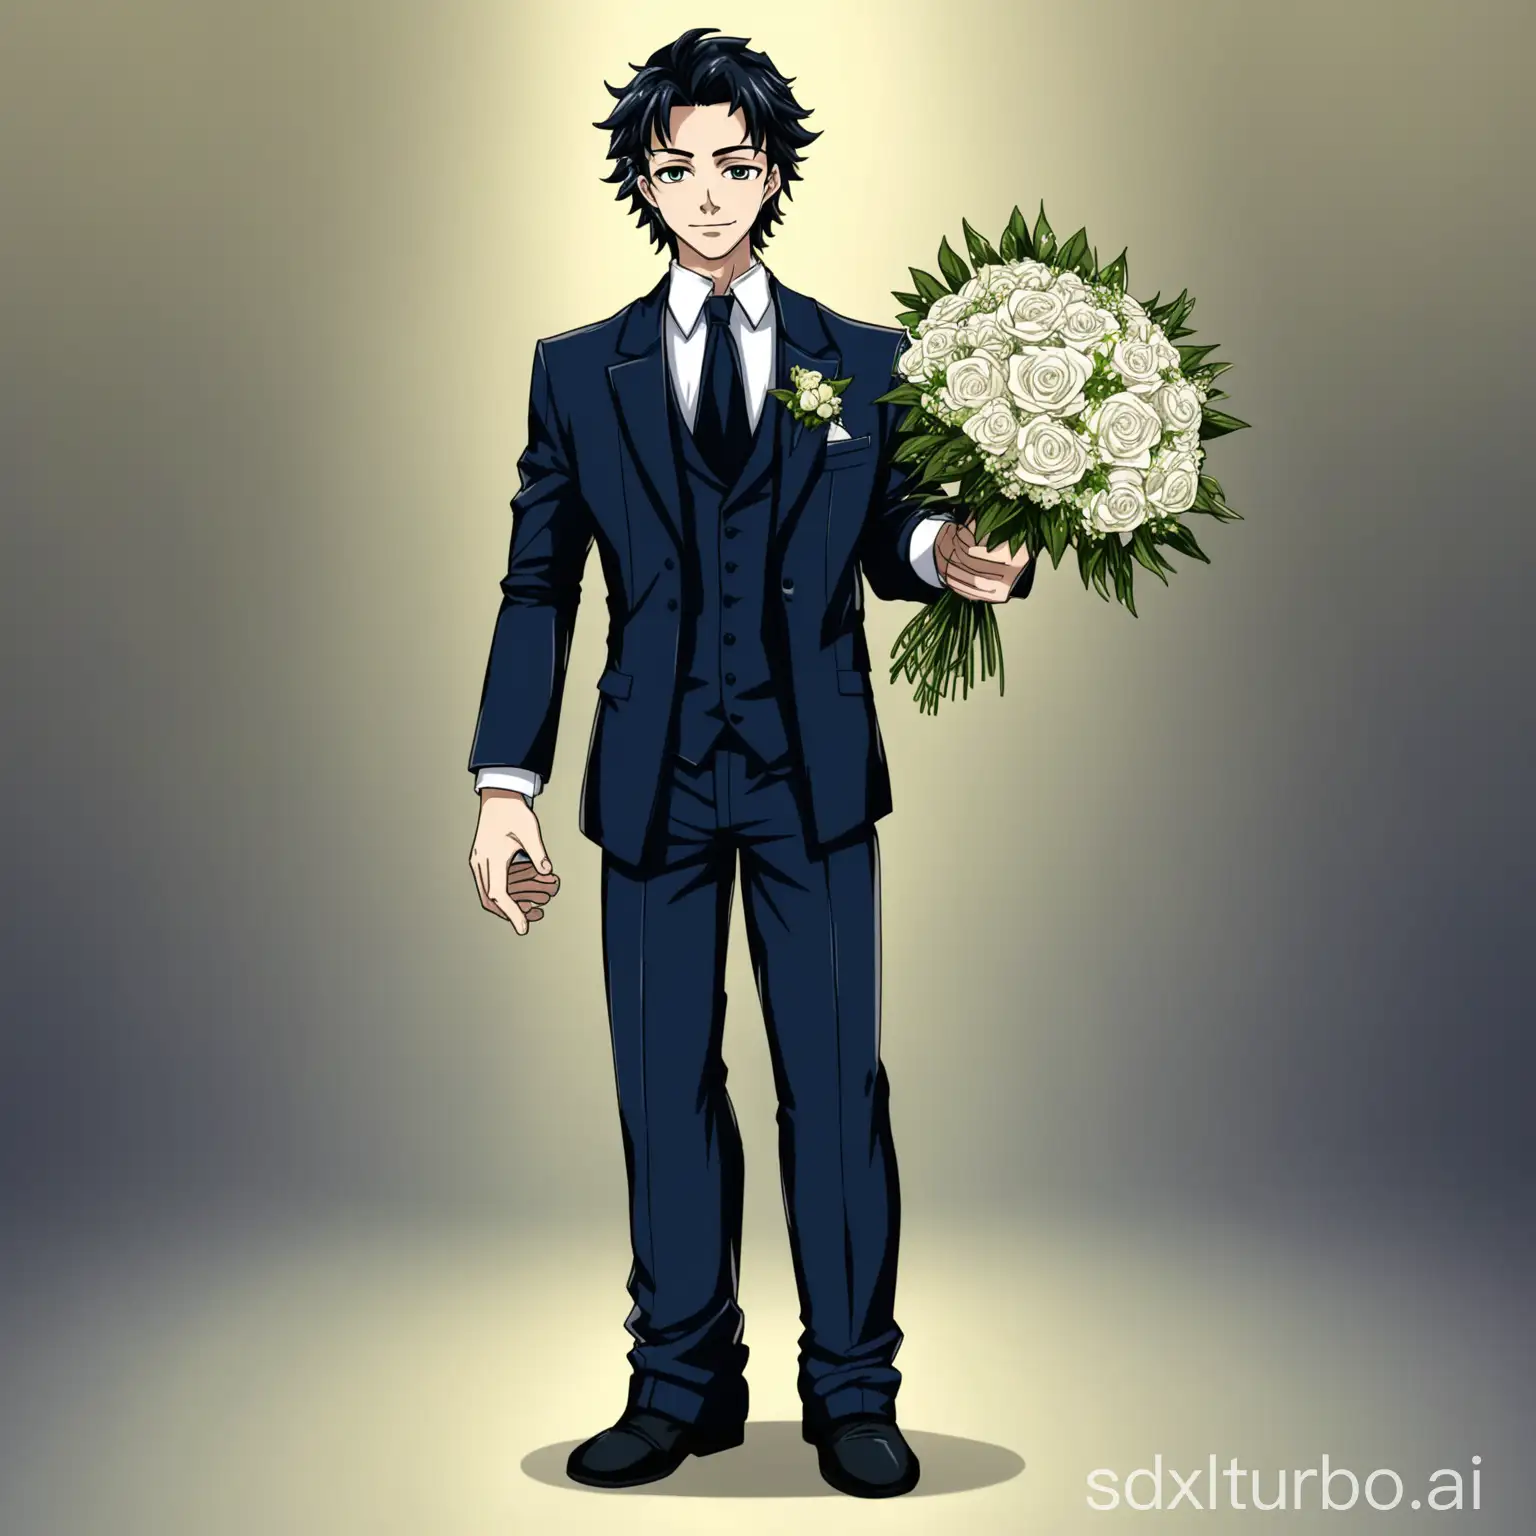 Make me a picture of a man wearing a wedding suit, And holding flowers in his hand make a full body, make an HD picture, in anime style